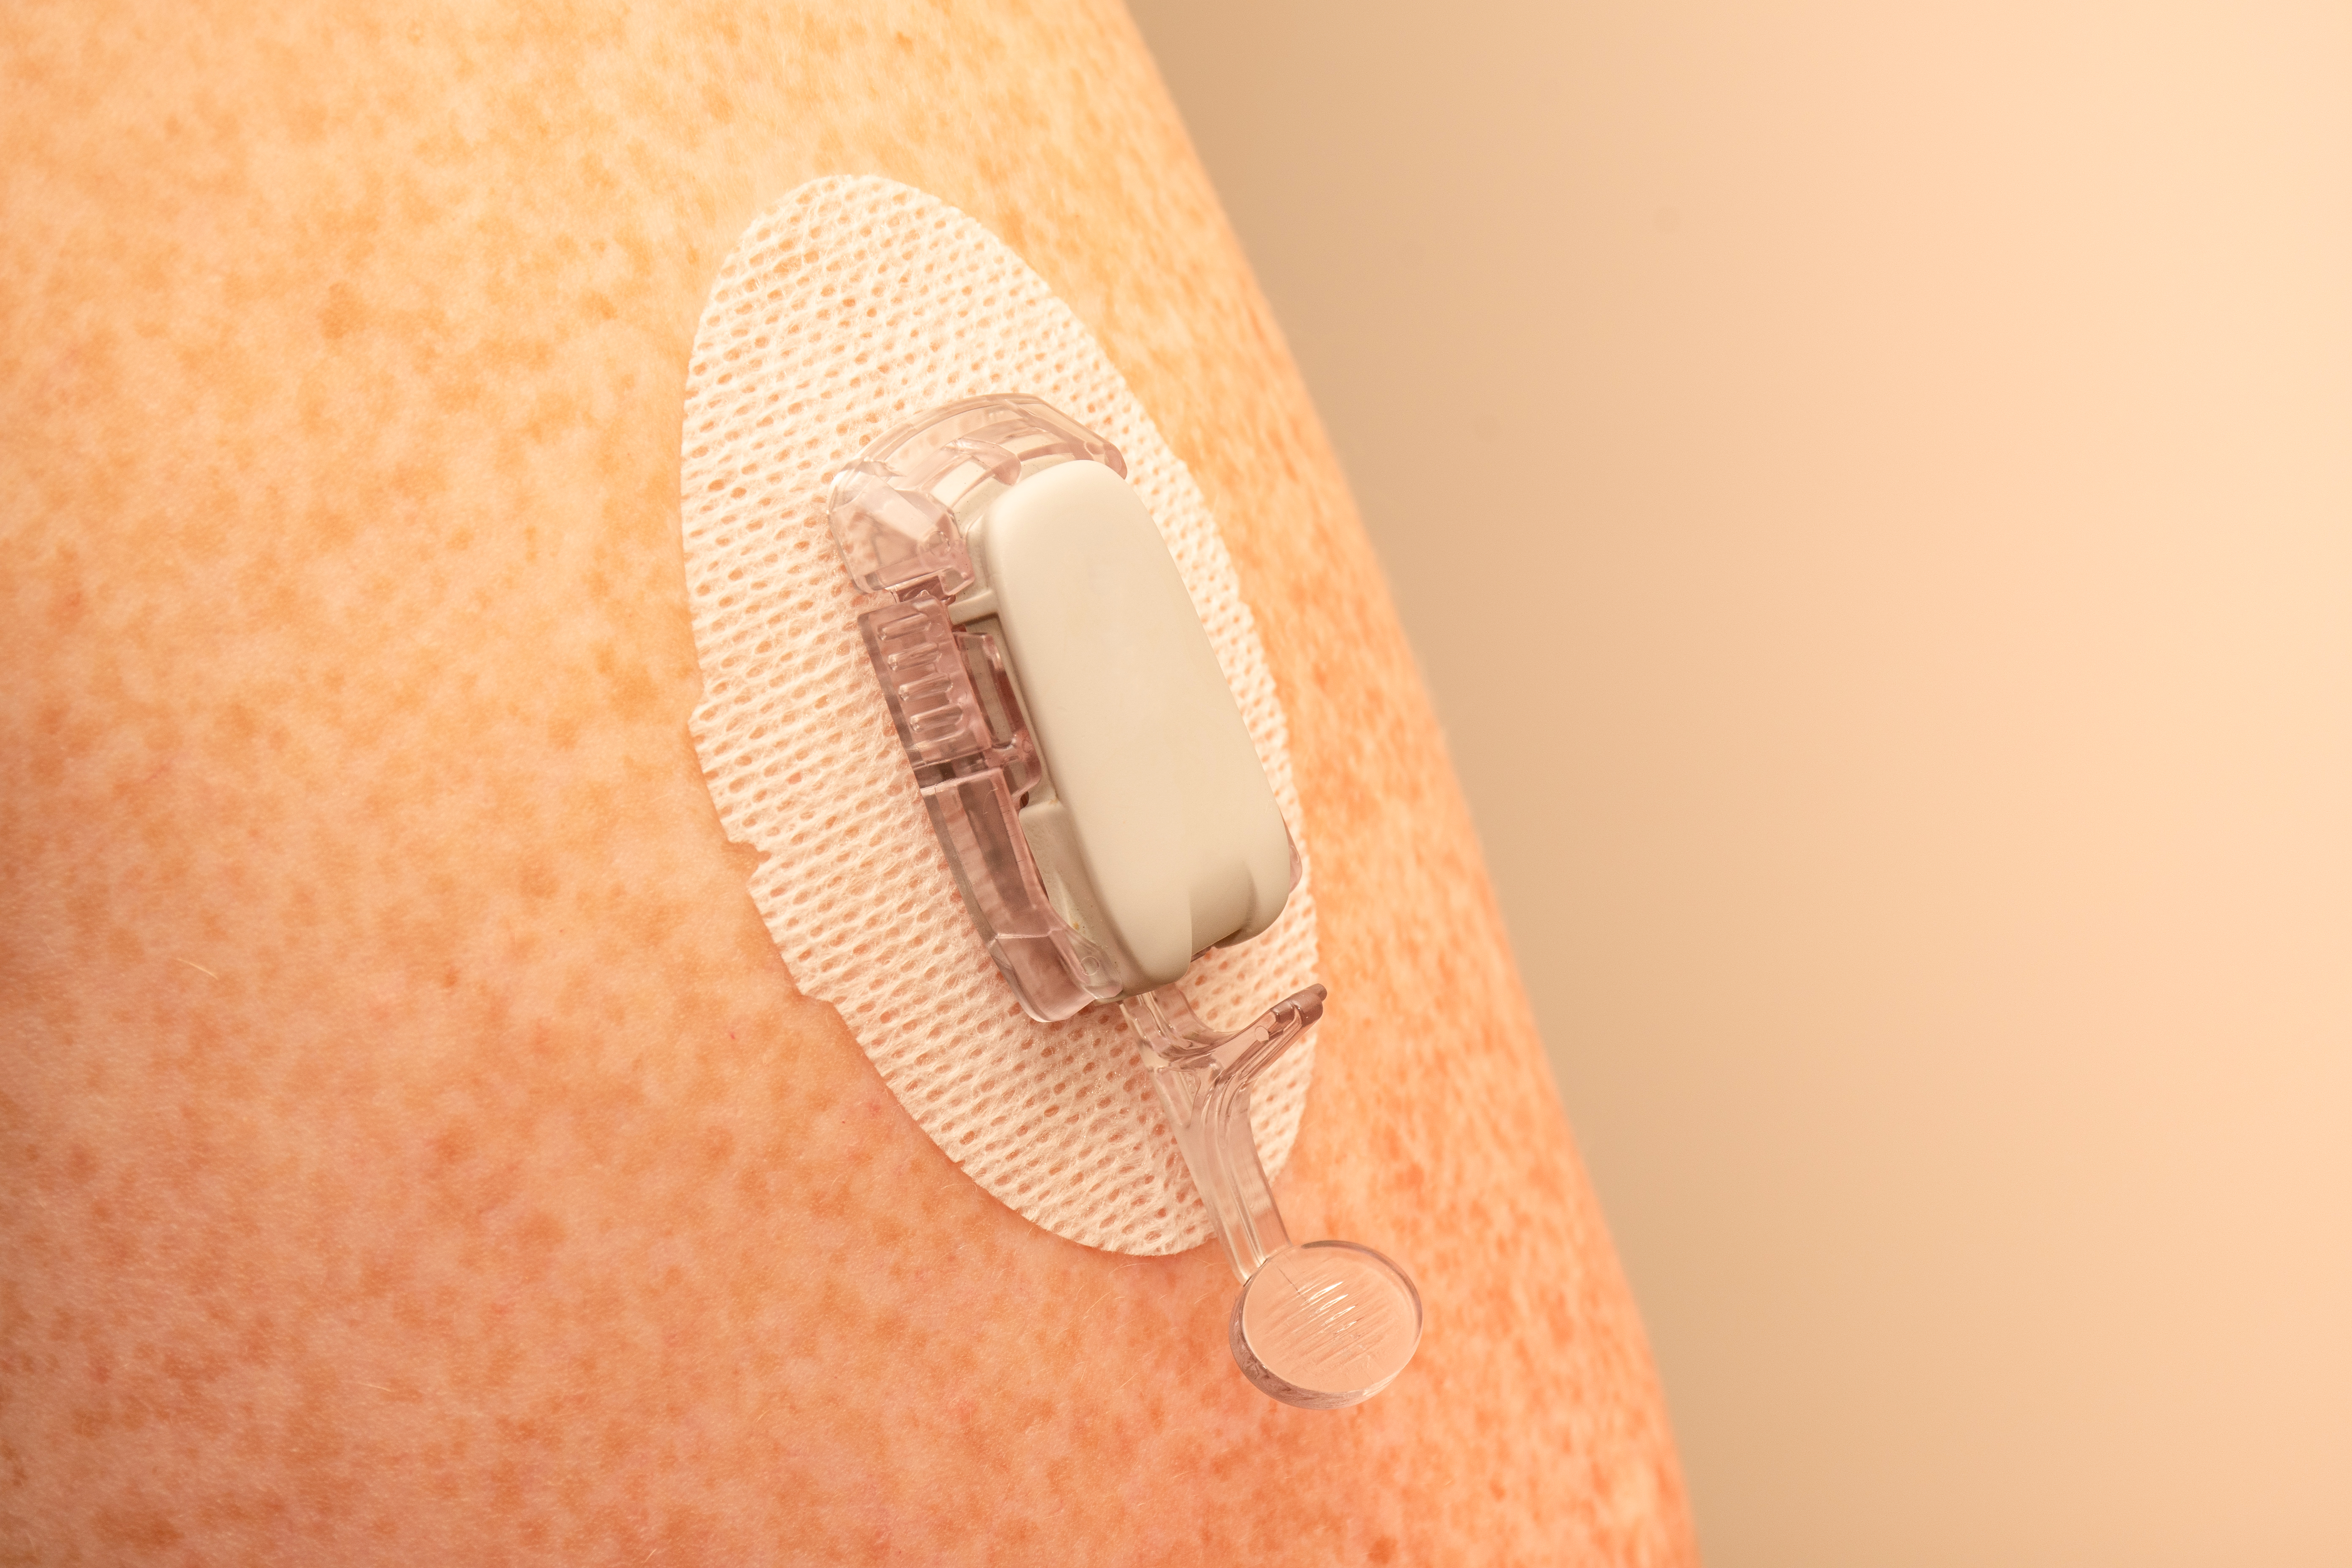 Developing Optimal Skin Contact Adhesives for Continuous Glucose Monitoring Devices